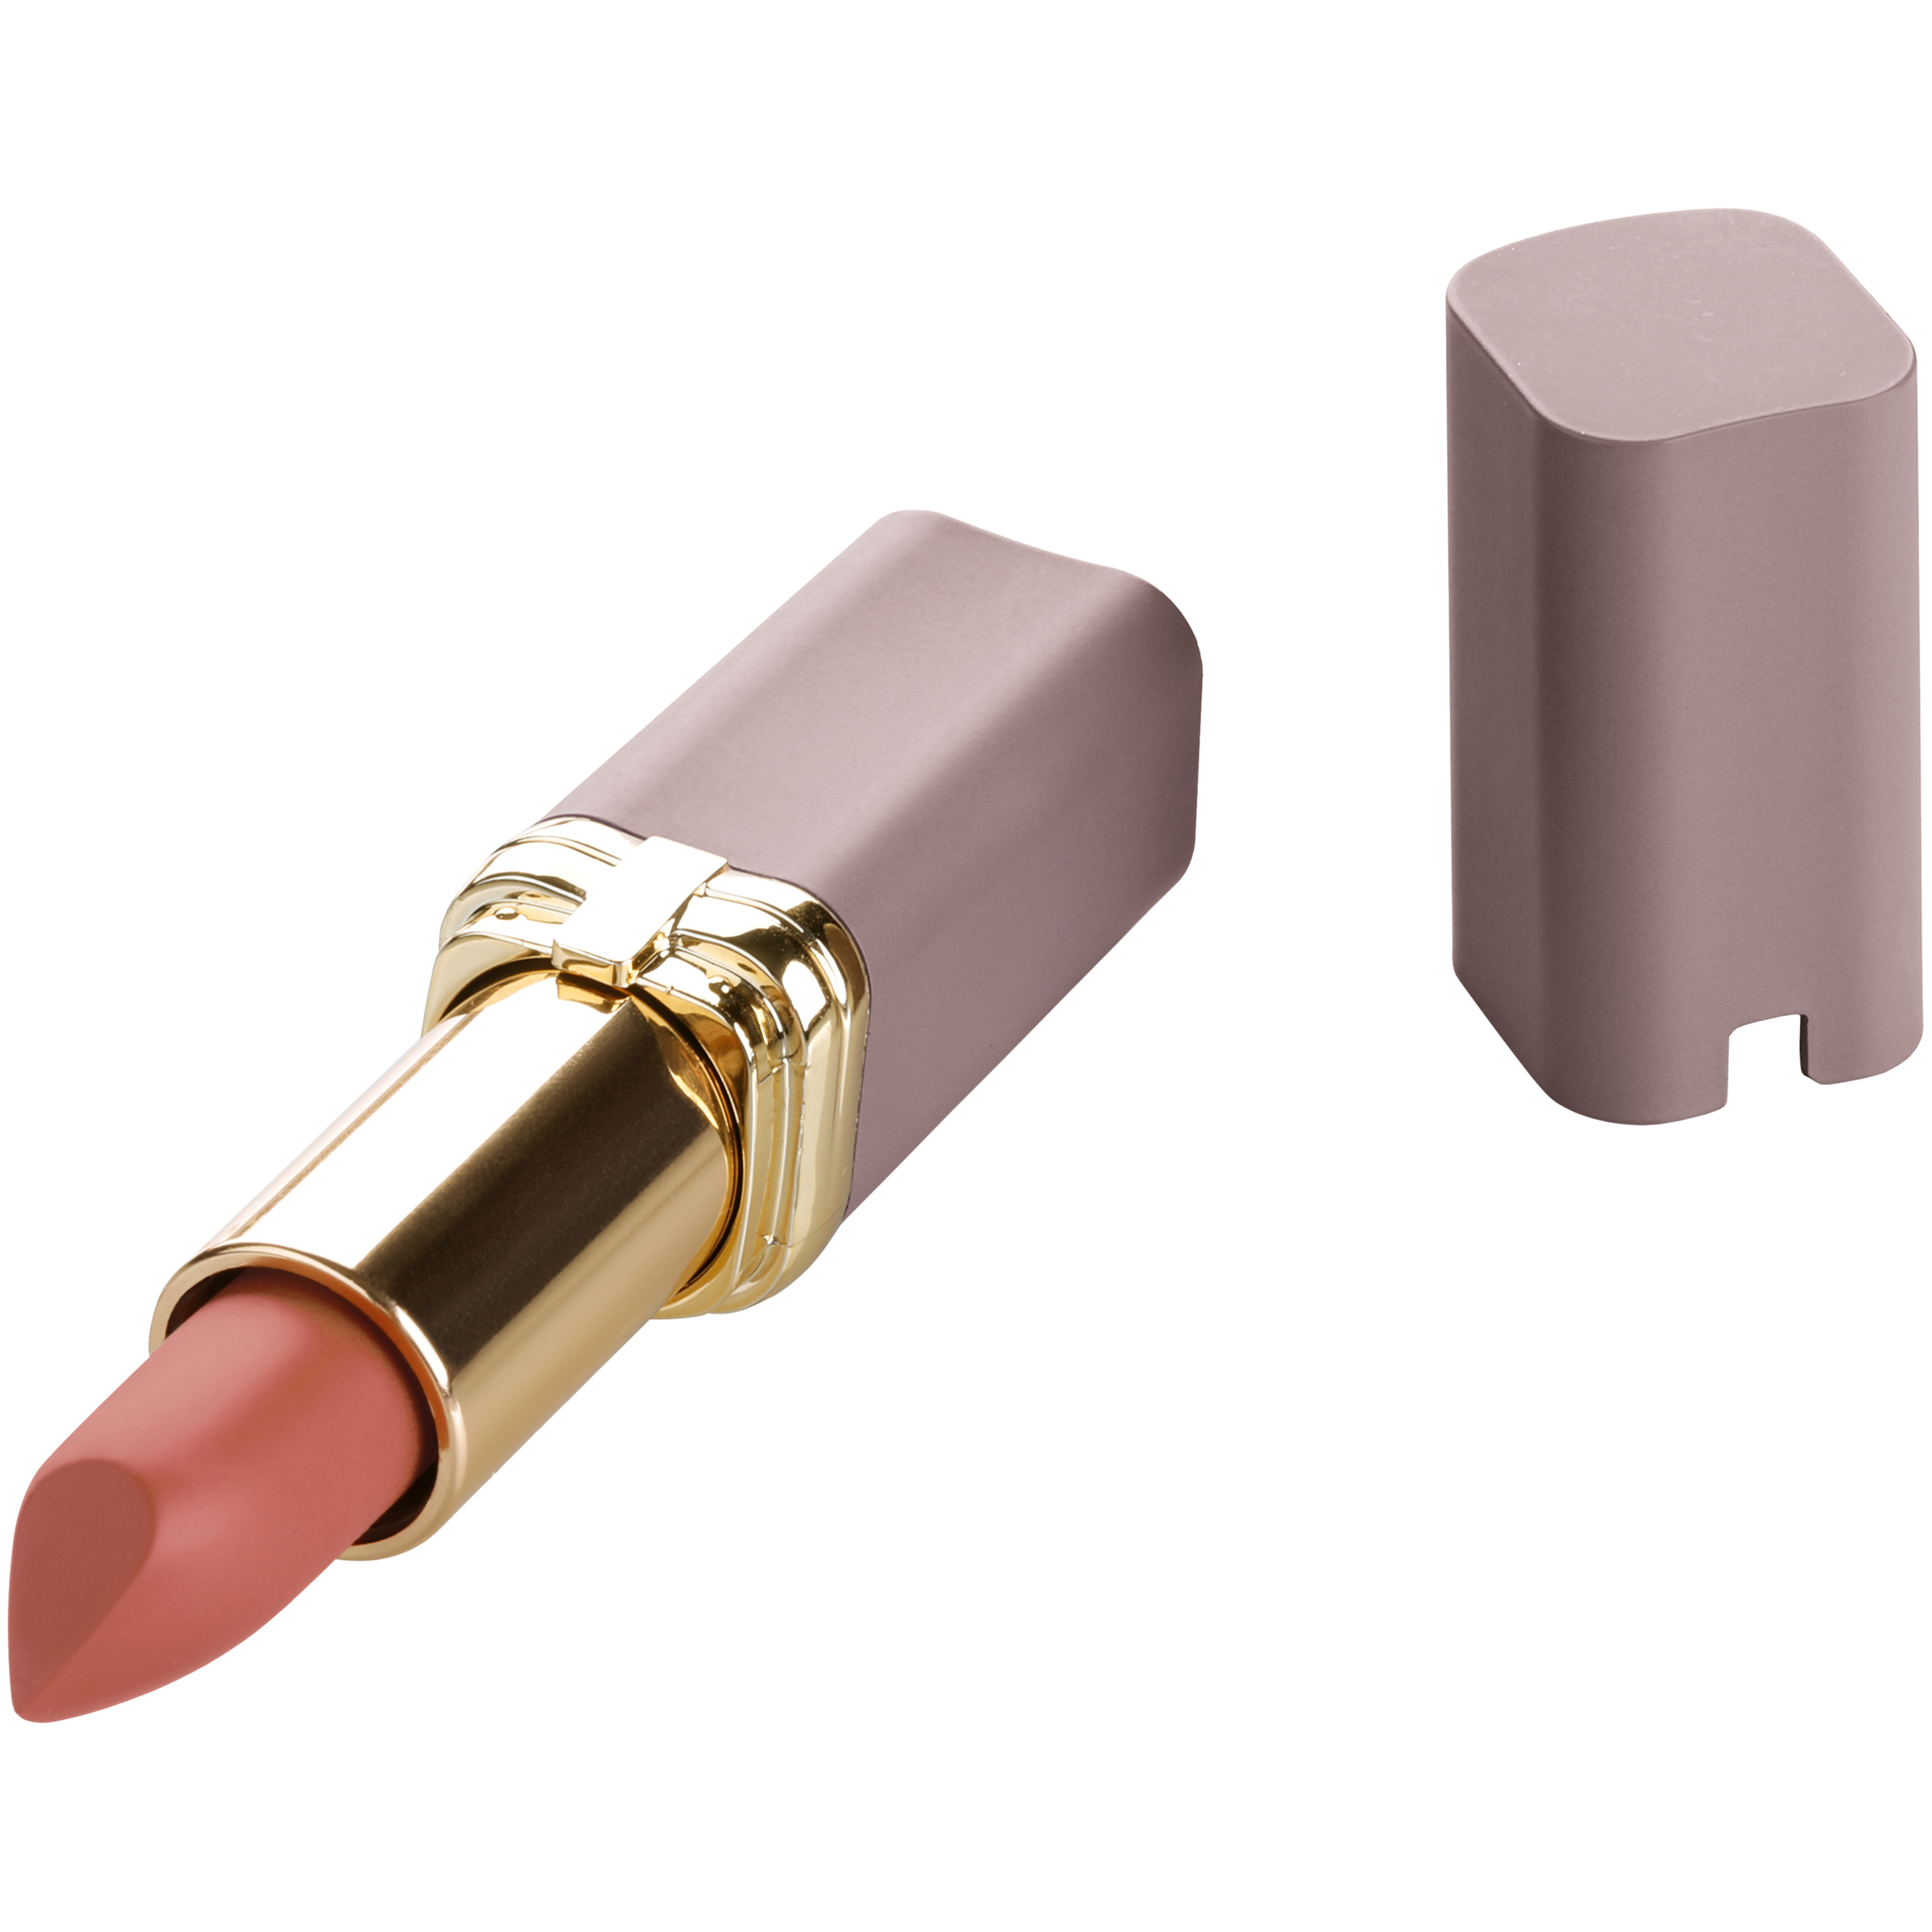 L'Oreal Paris Colour Riche Ultra Matte Highly Pigmented Nude Lipstick, Risque Roses, 0.13 oz. - image 2 of 5